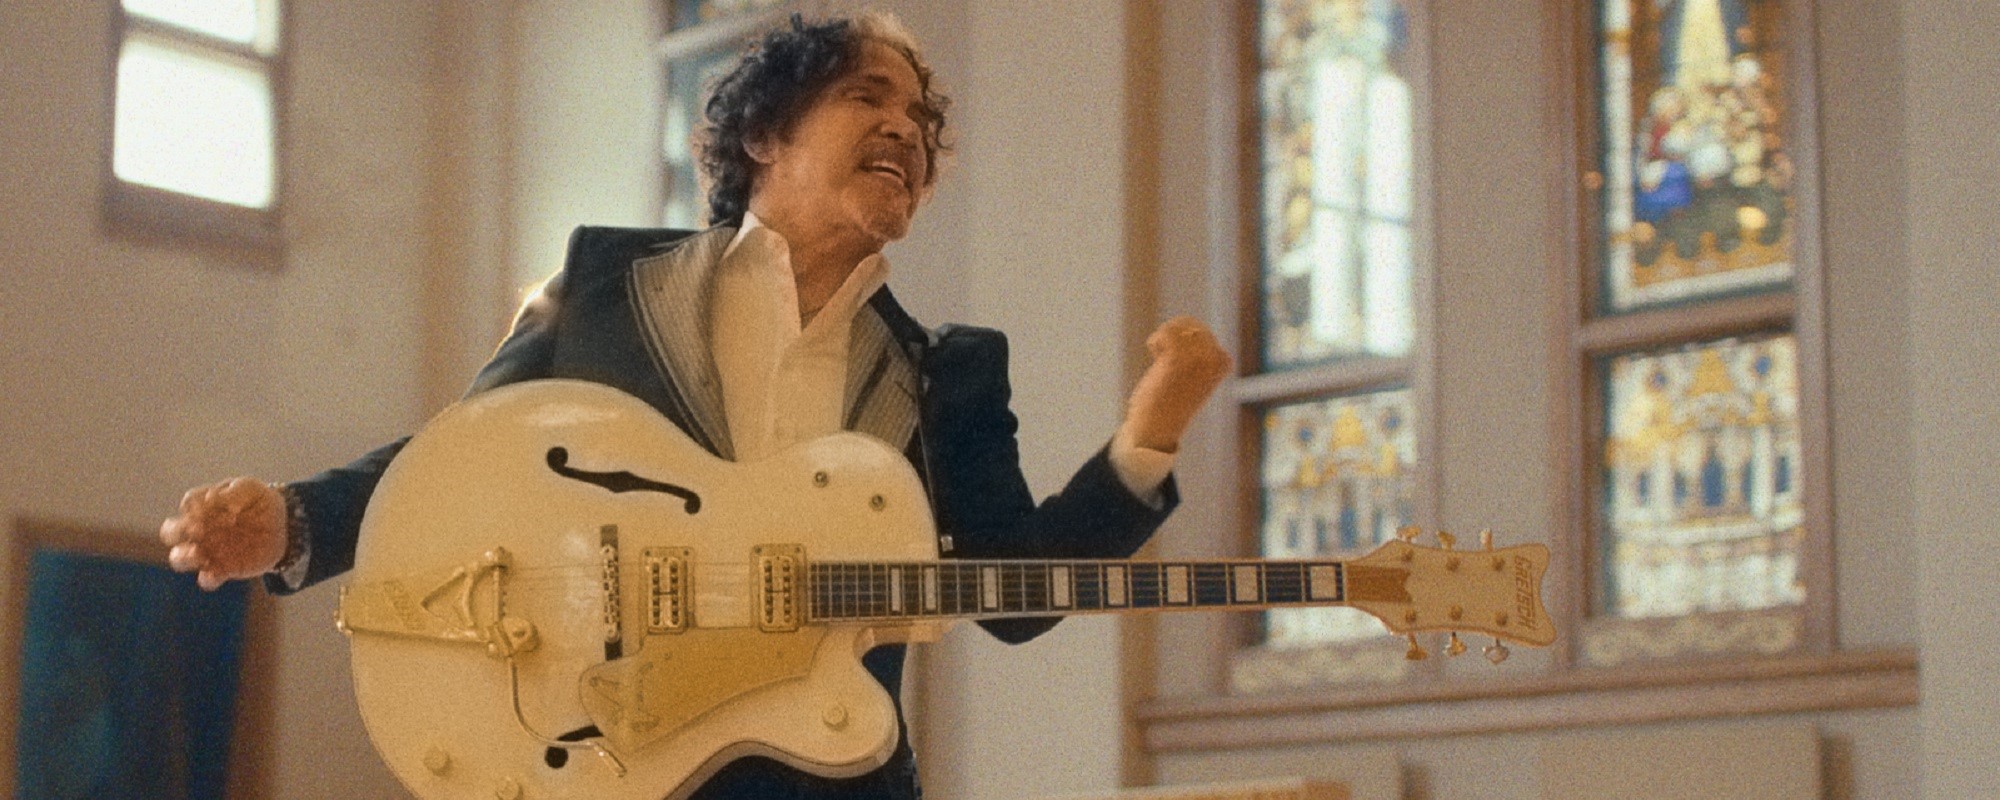 Exclusive: Ex-Hall & Oates Singer John Oates Discusses His New Cover of John Prine’s “Evocative” Song “Long Monday”